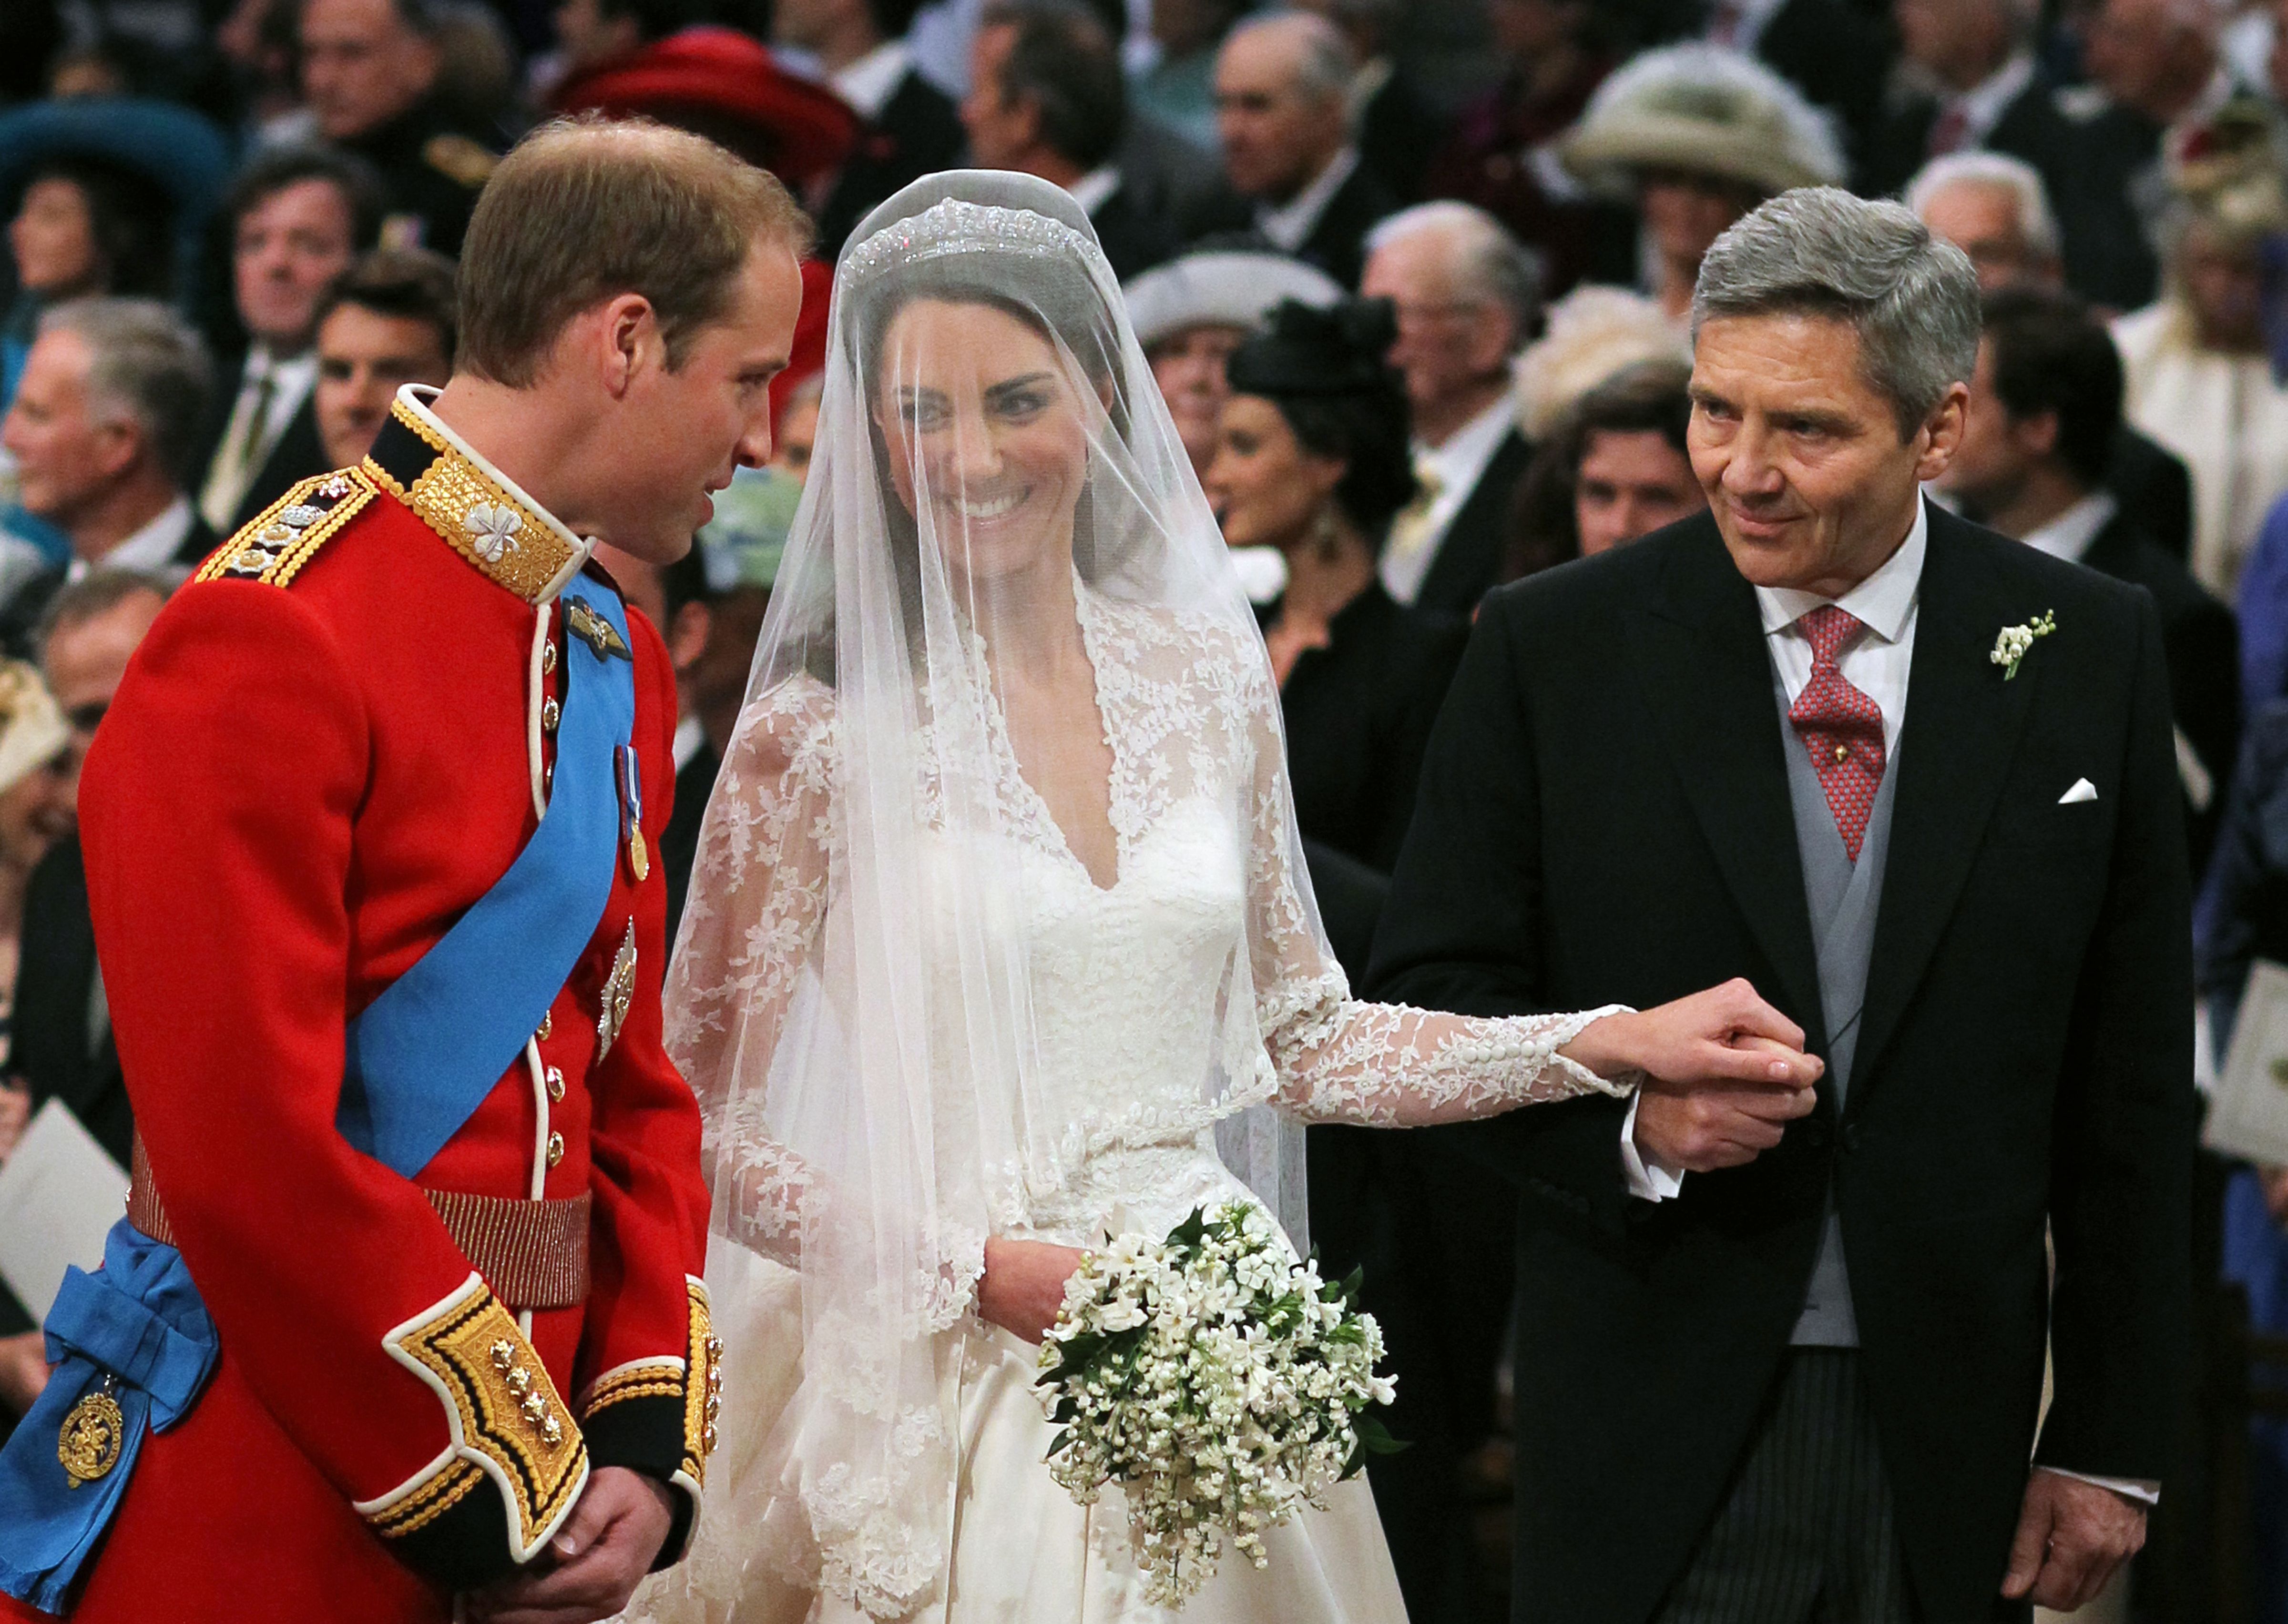 Prince William, Kate Middleton, and Michael Middleton at Westminster Abbey, London. | Source: Getty Images